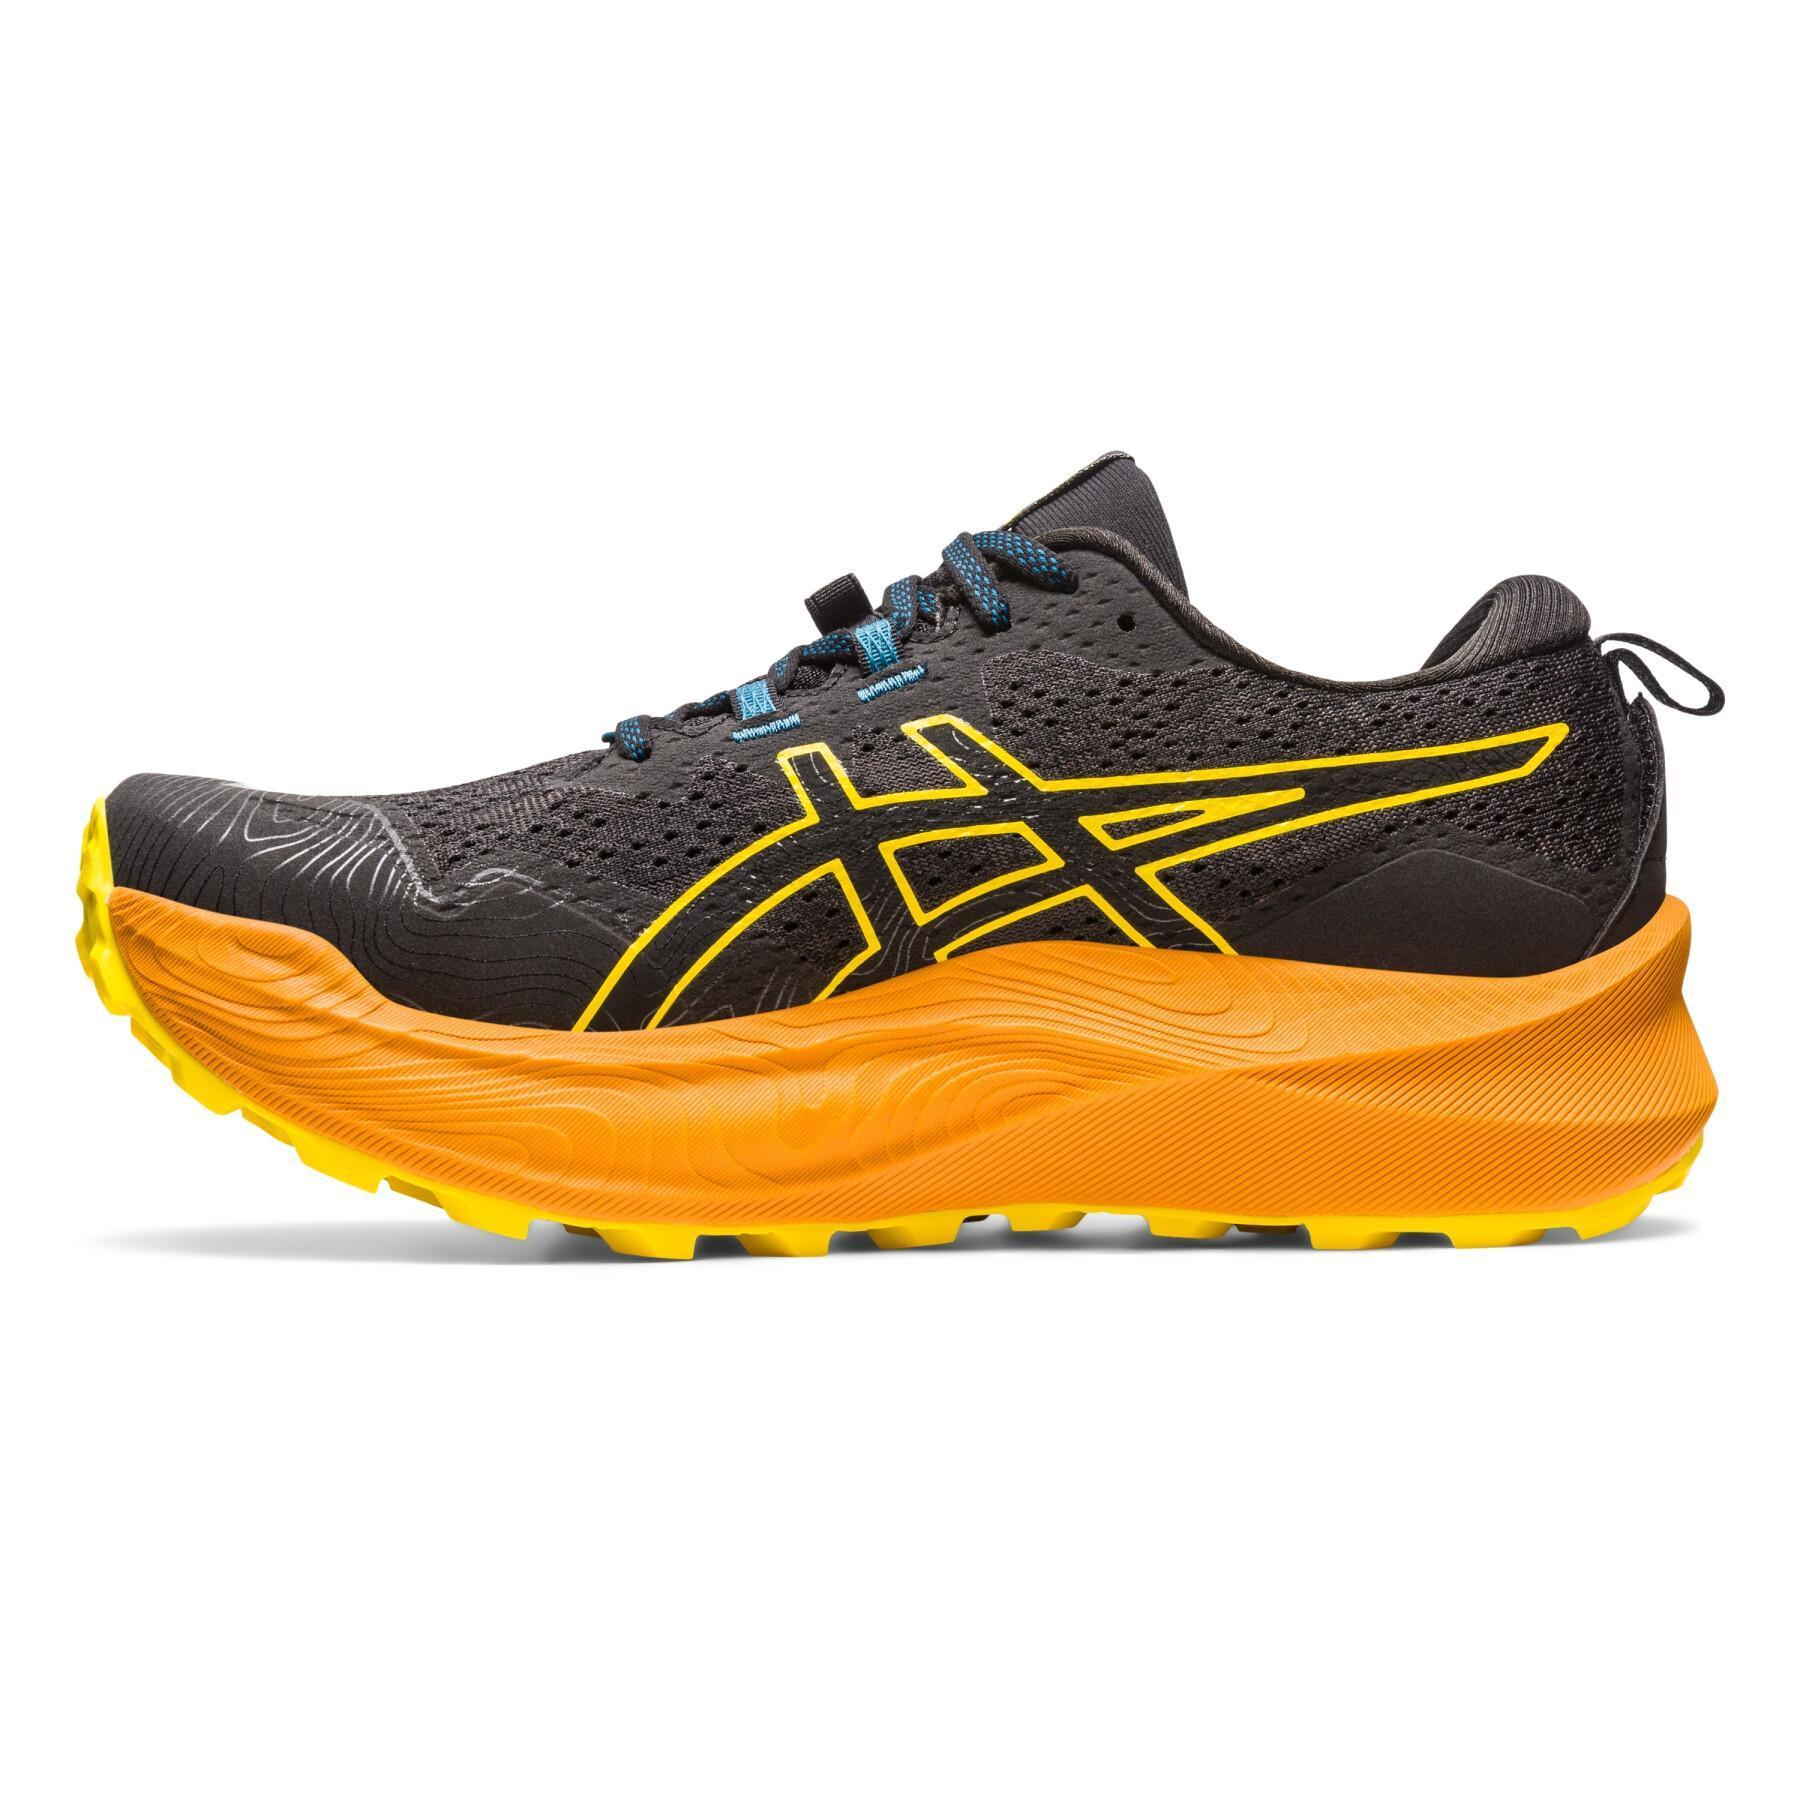 Shoes from trail Asics Trabuco Max 2